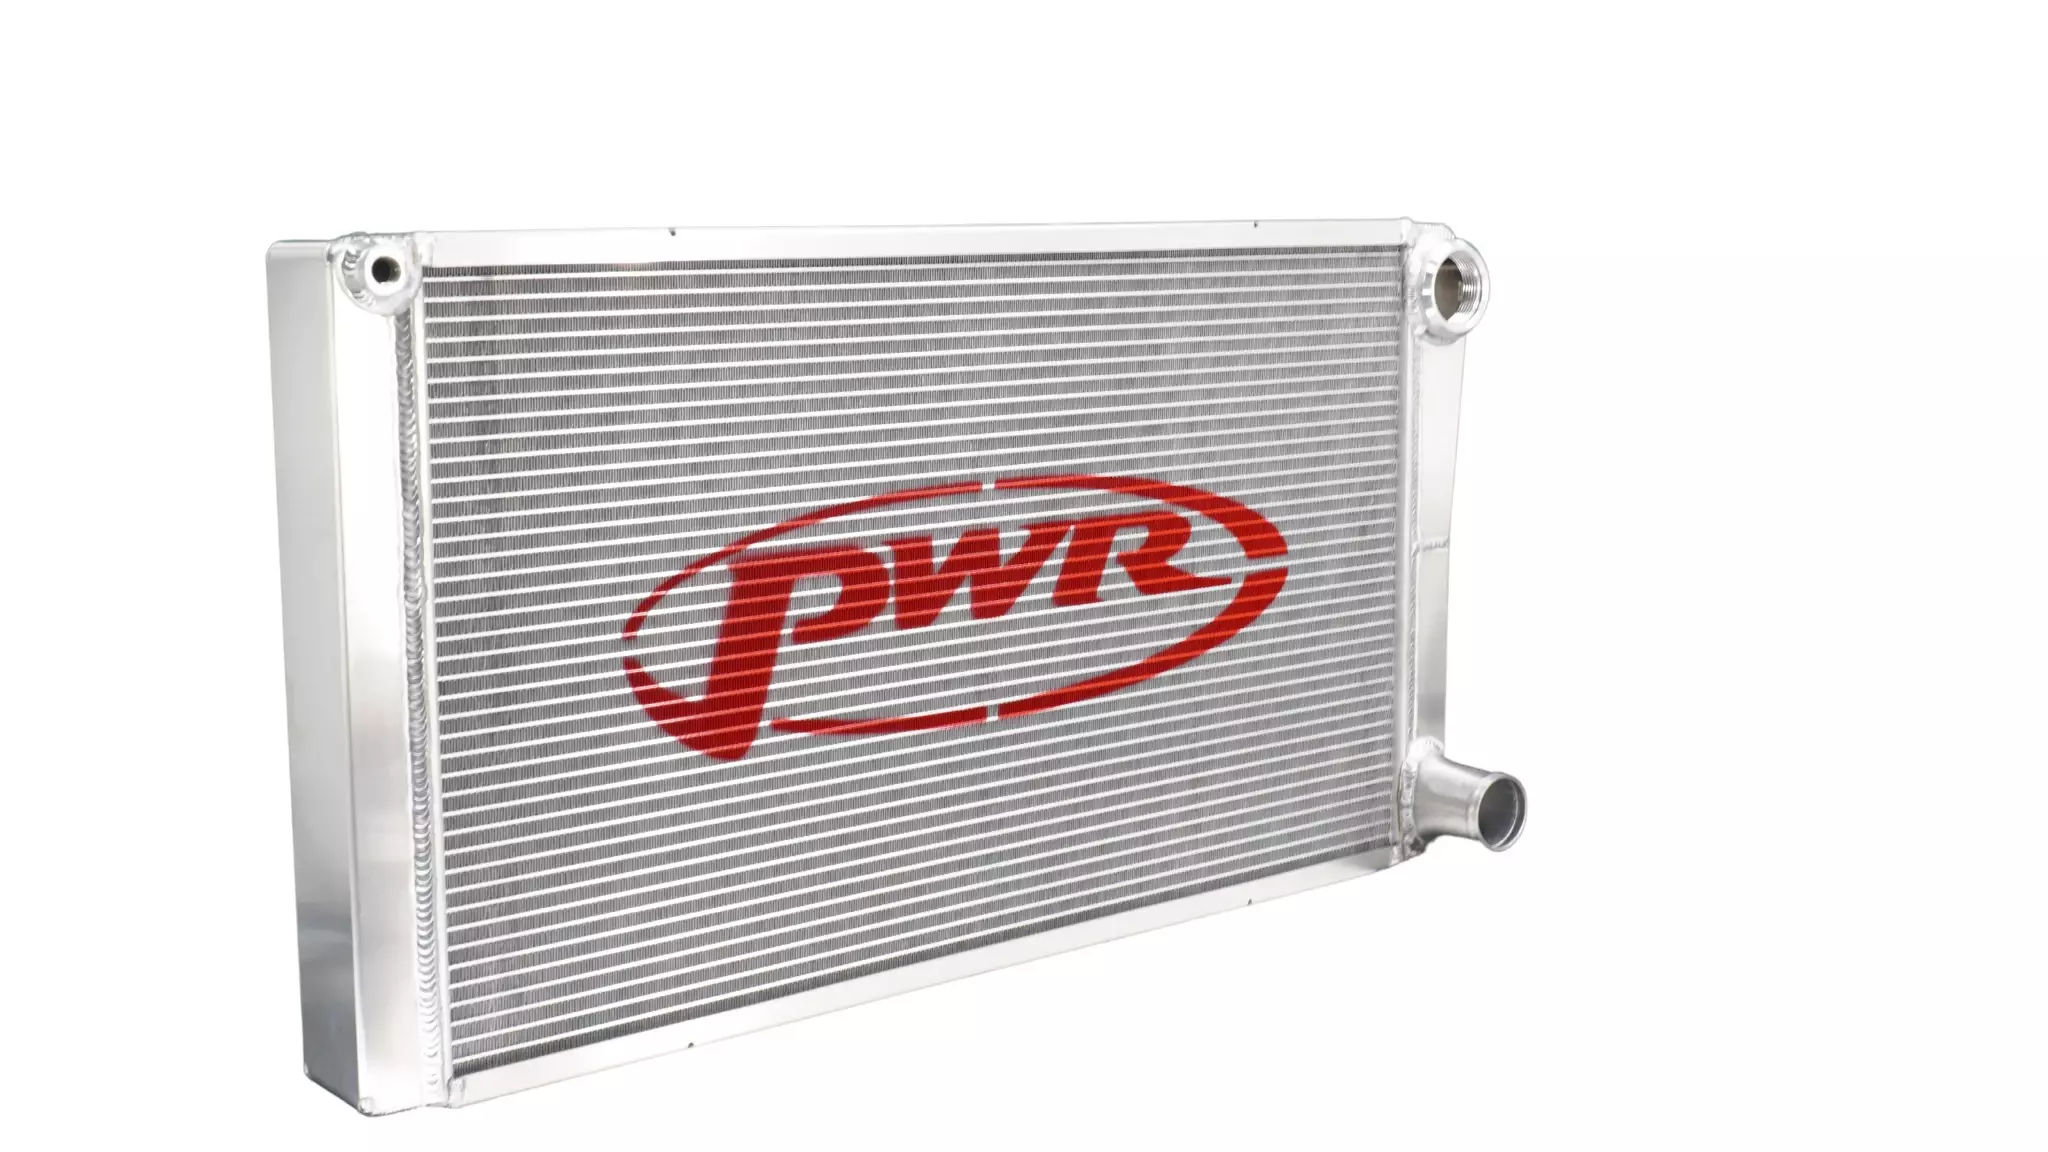 PWR 926-15288 Radiator, 27-1/2 in W x 15 in H x 2.56 in D, Dual Pass, Passenger Side Inlet, Passenger Side Outlet, Aluminum, Natural, Each